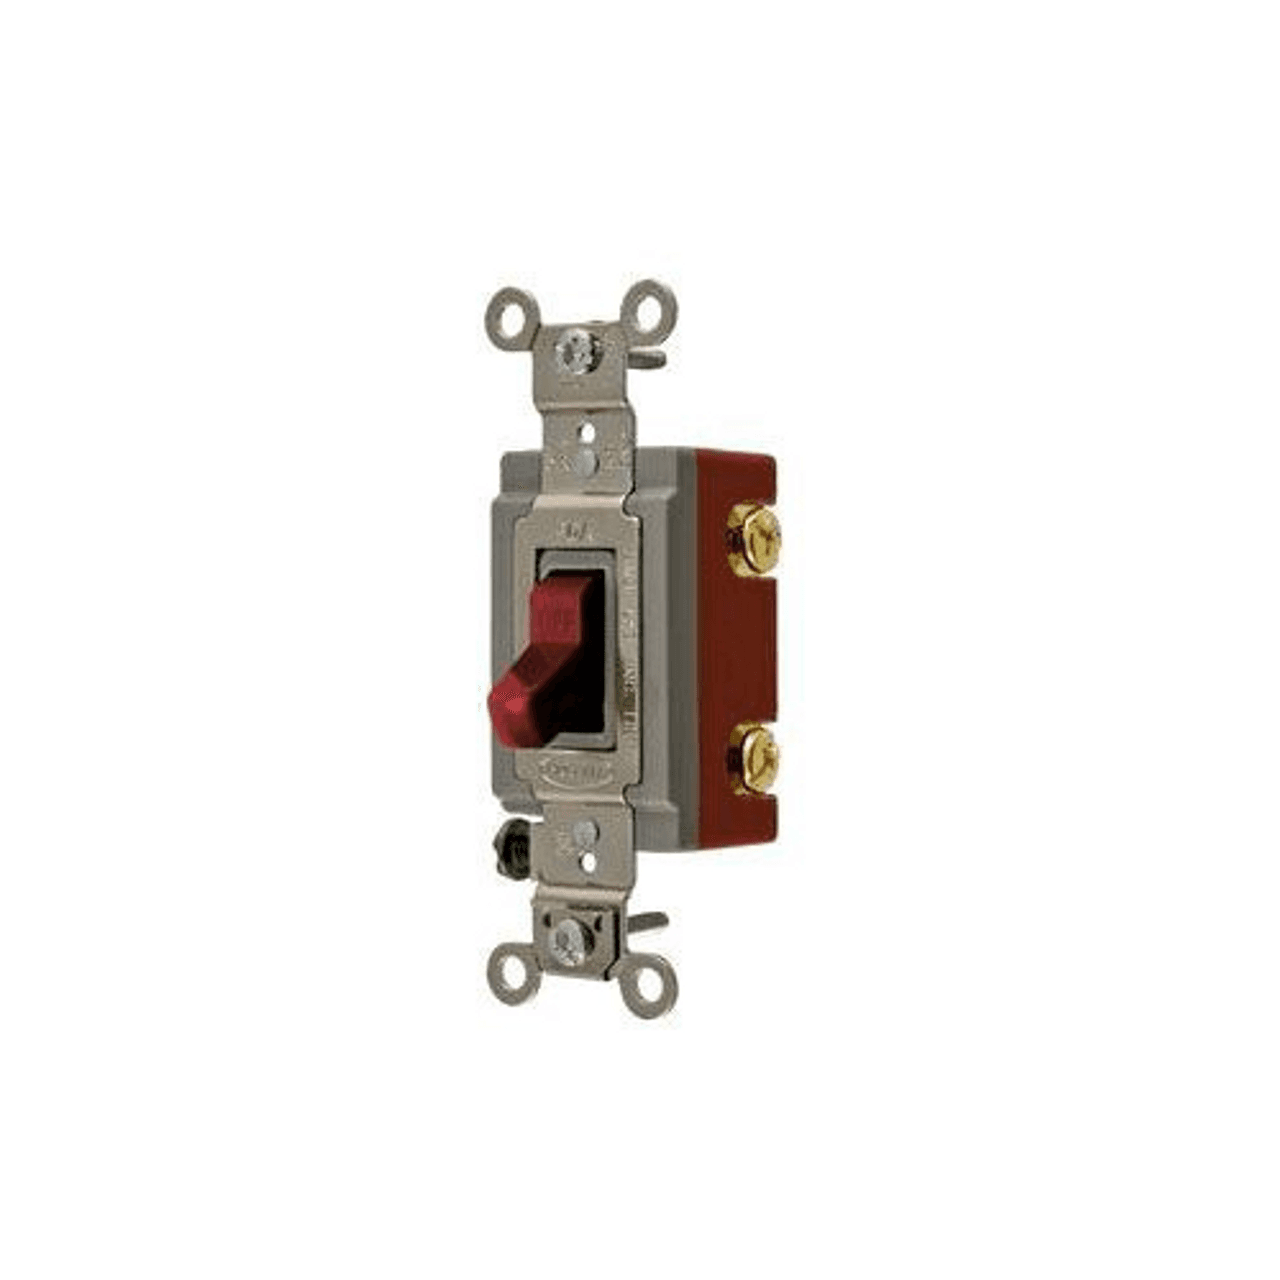 Hubbell HBL1221R Switches and Lighting Controls, Extra Heavy Duty Industrial Grade, Toggle Switches, General Purpose AC, Single Pole, 20A 120/277V AC, Back and Side Wired, Red Toggle  ; Large brass binding head screws with deep slots ; Abuse resistant nylon toggle ; Strip